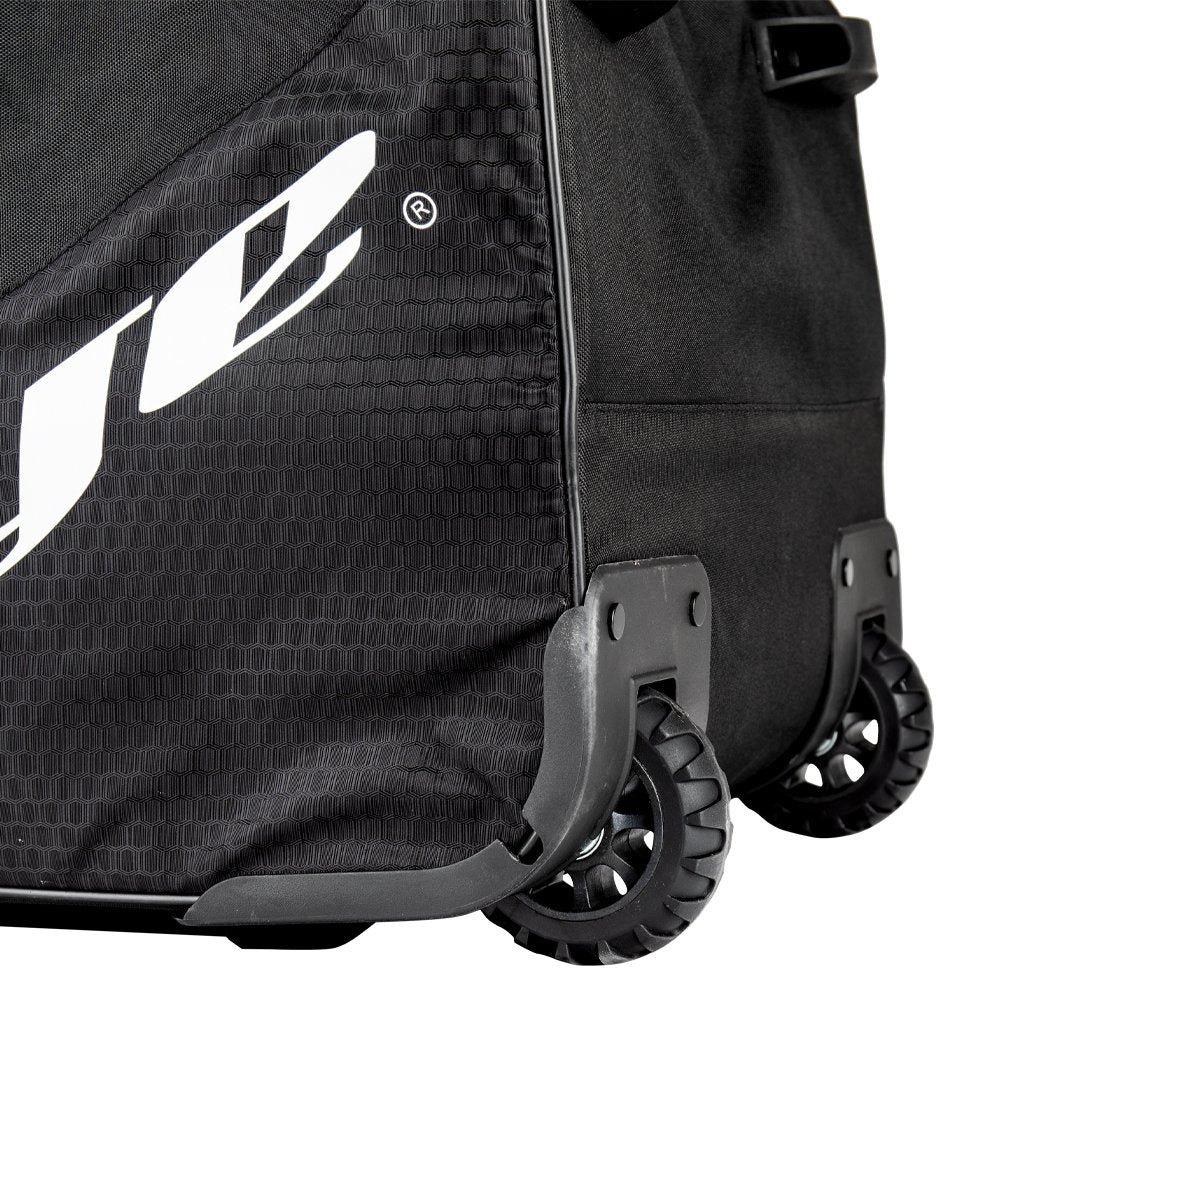 The Discovery Gear Bag 1.5T